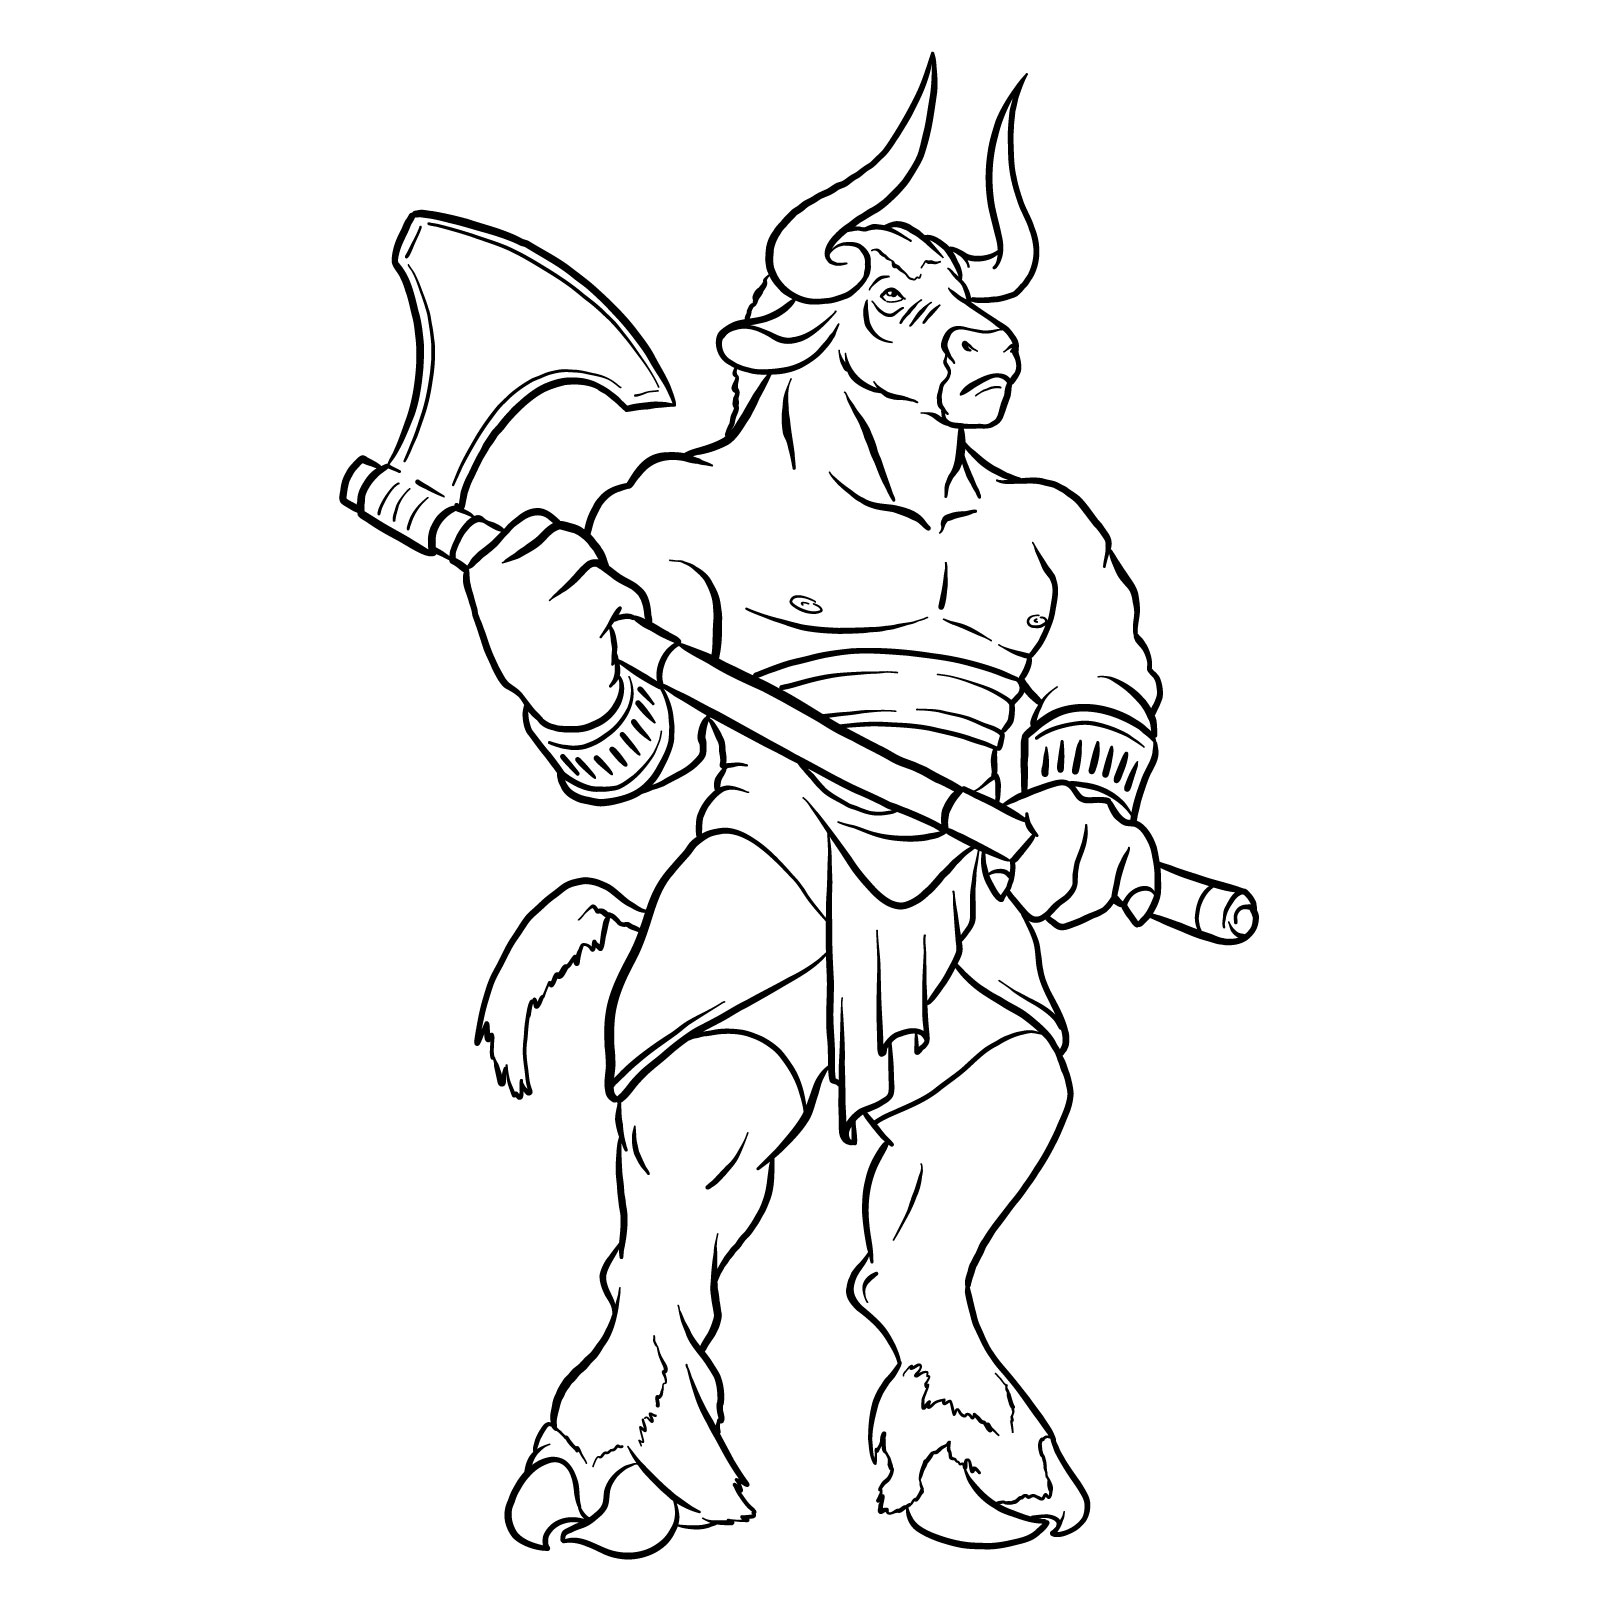 How to draw a Minotaur - coloring